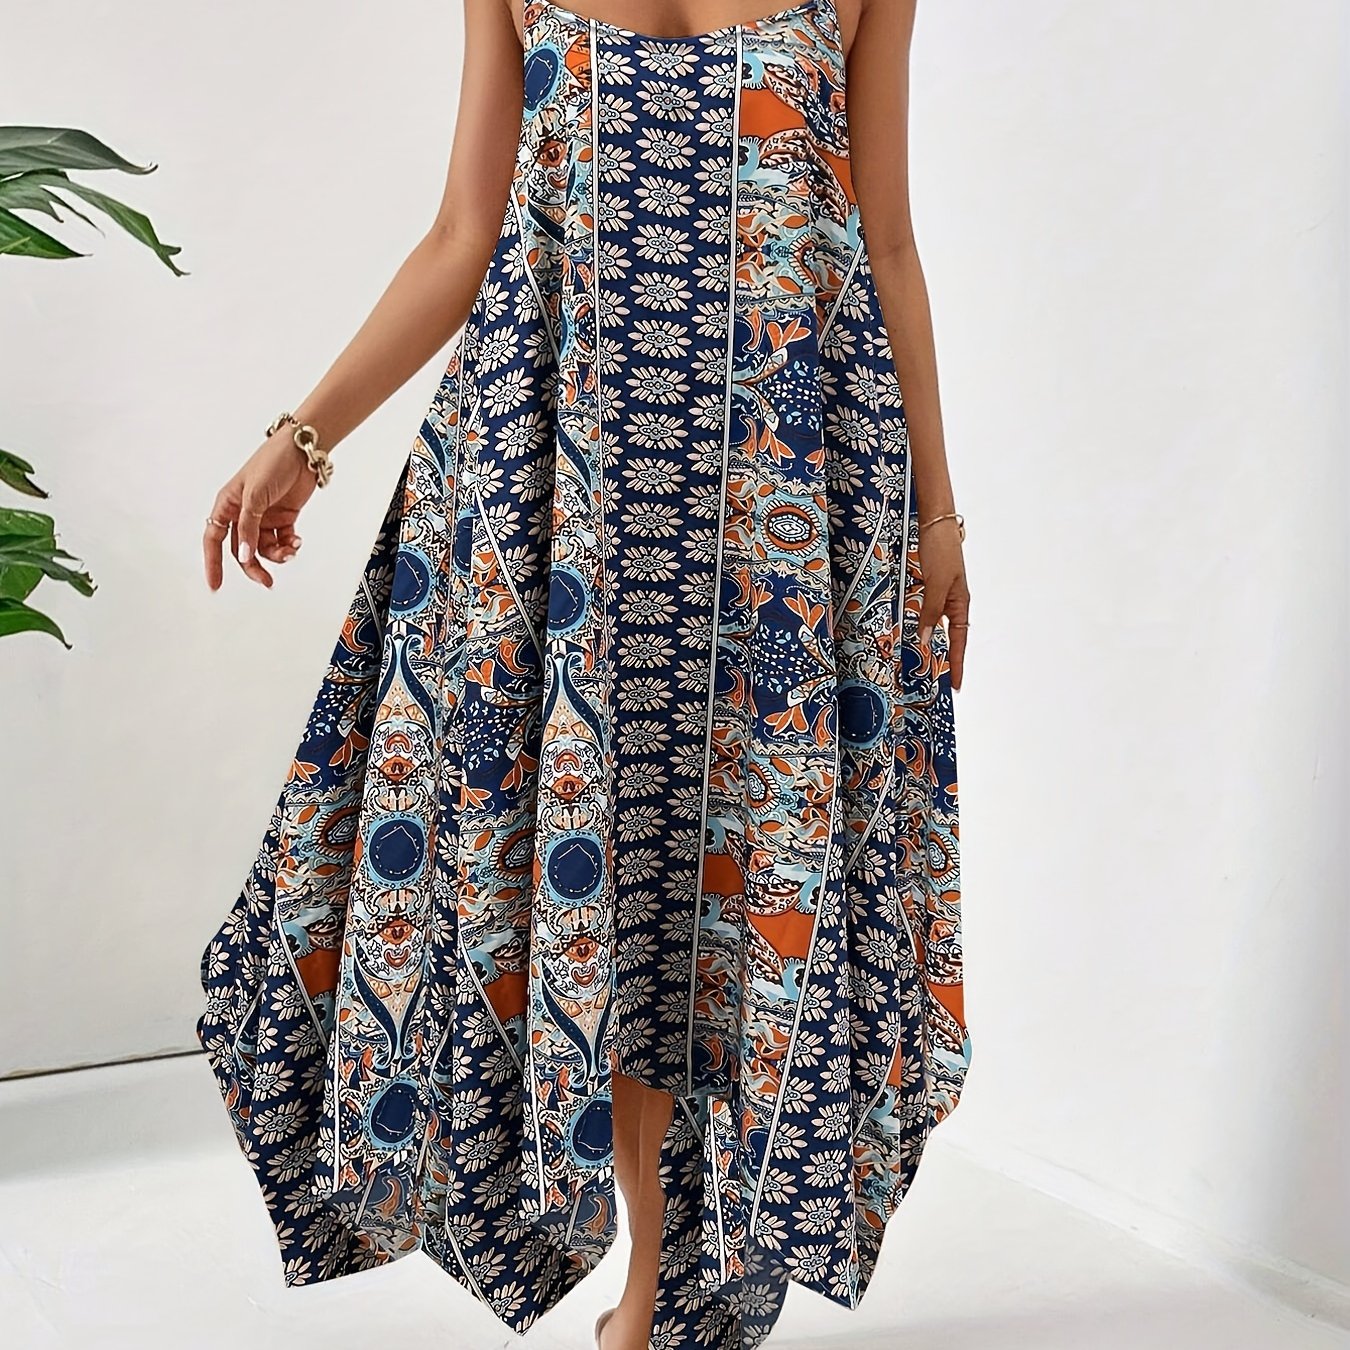 Vibrant Tropical Print Slingback Dress - Sleeveless, Loose-Fit, Casual Polyester Spaghetti Strap Cami Dress for Women - Perfect for Spring and Summer Vacation